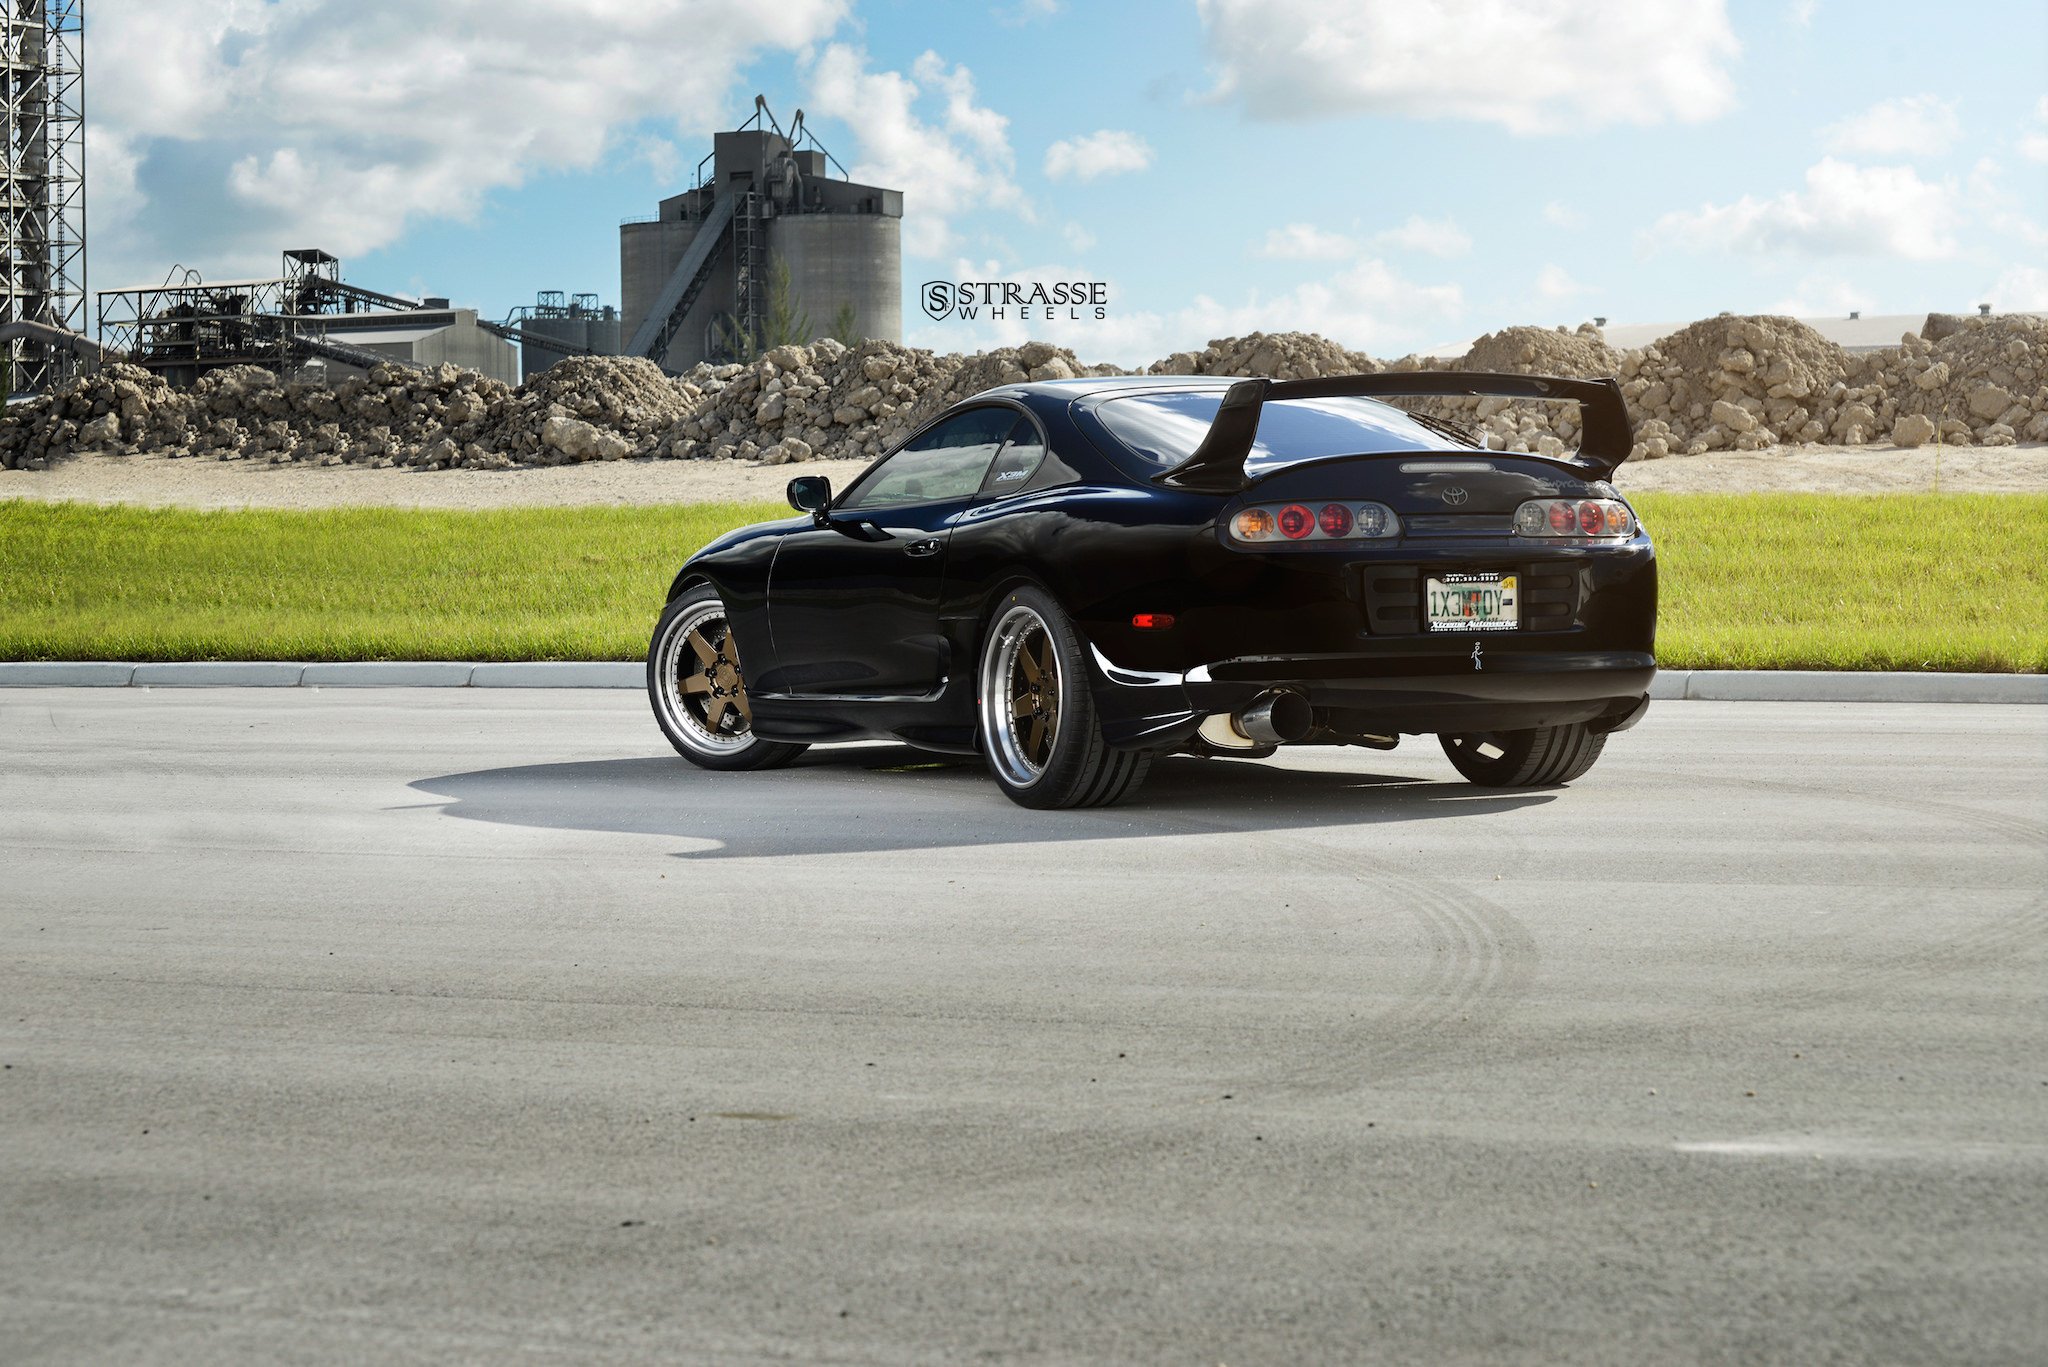 strasse, Wheels, Toyota, Supra, By, Xtreme, Autowerke, Cars, Black, Coupe Wallpaper